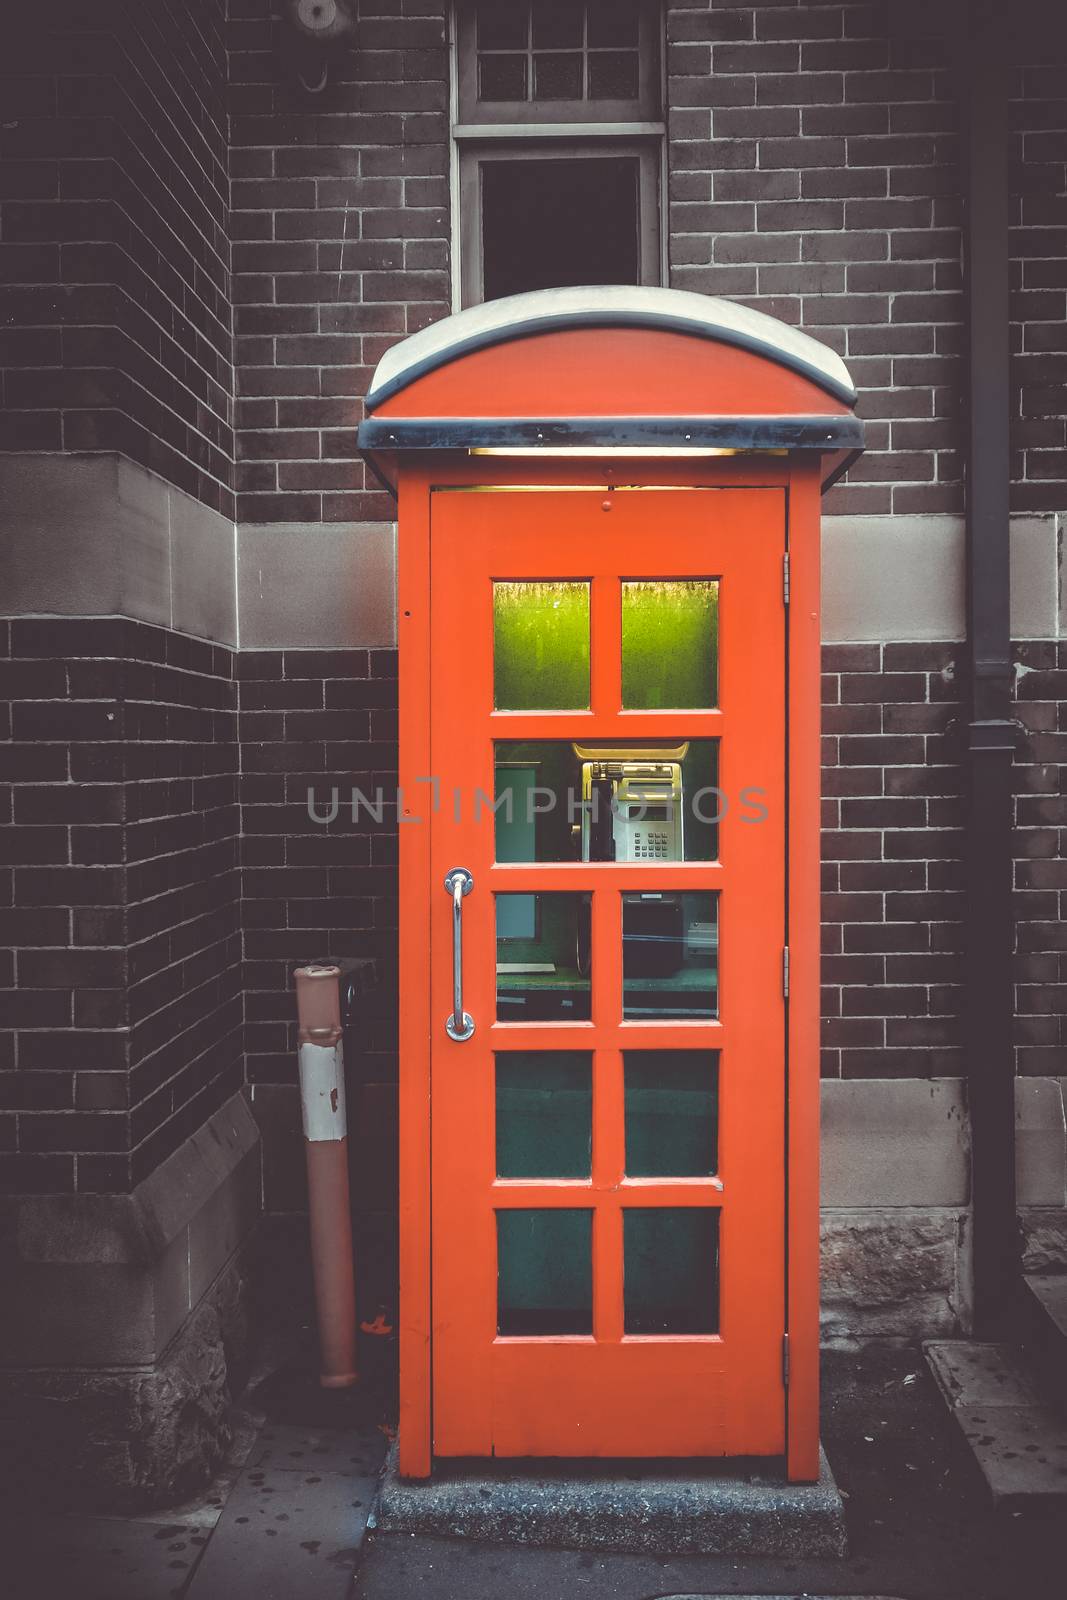 Vintage UK red phone booth in front of a brick wall